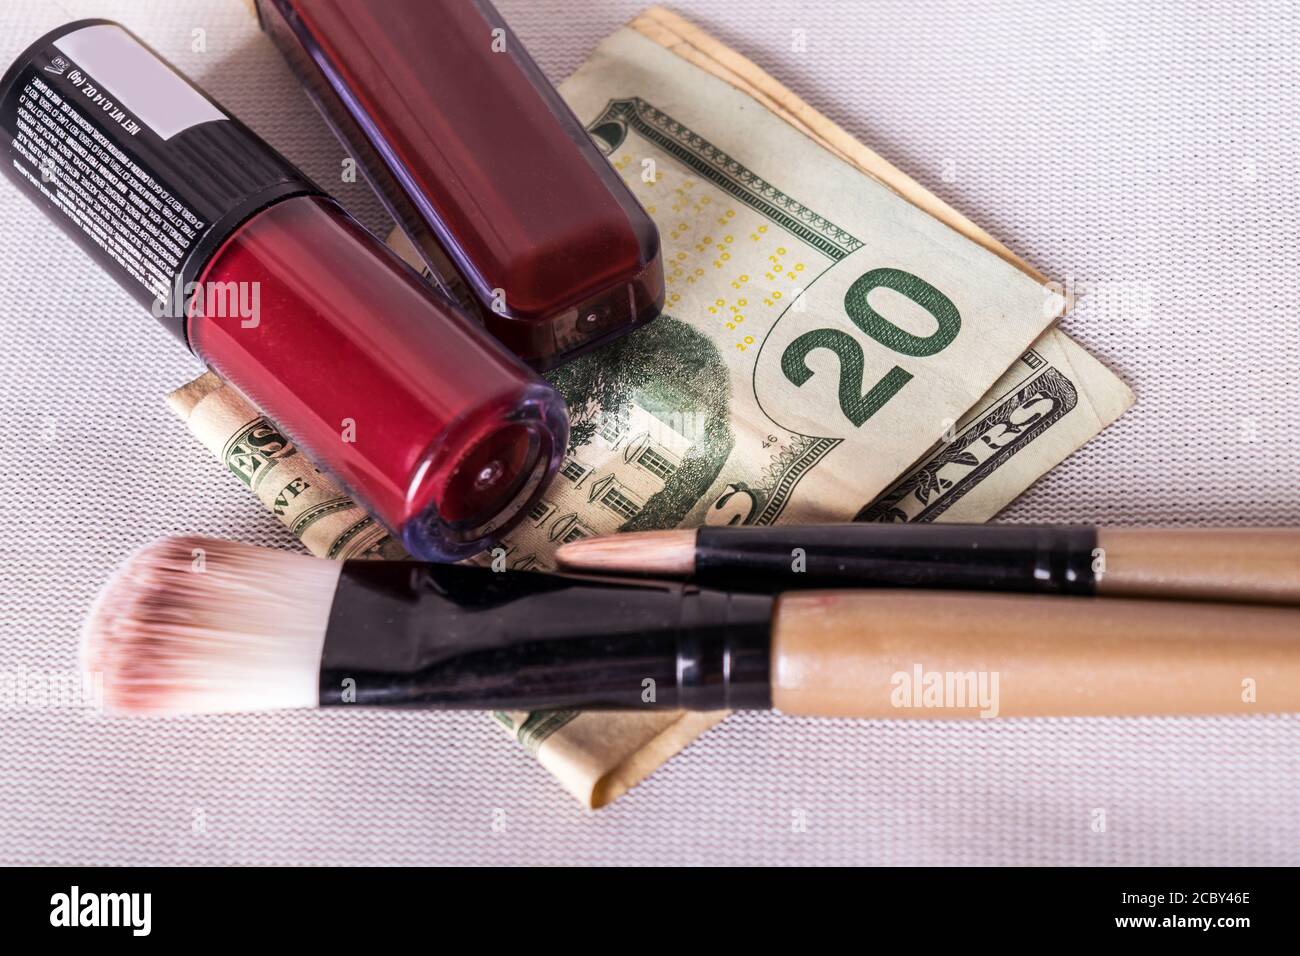 A flat lay photo of red lipsticks and make up brushes all on top of folded dollar bills Stock Photo